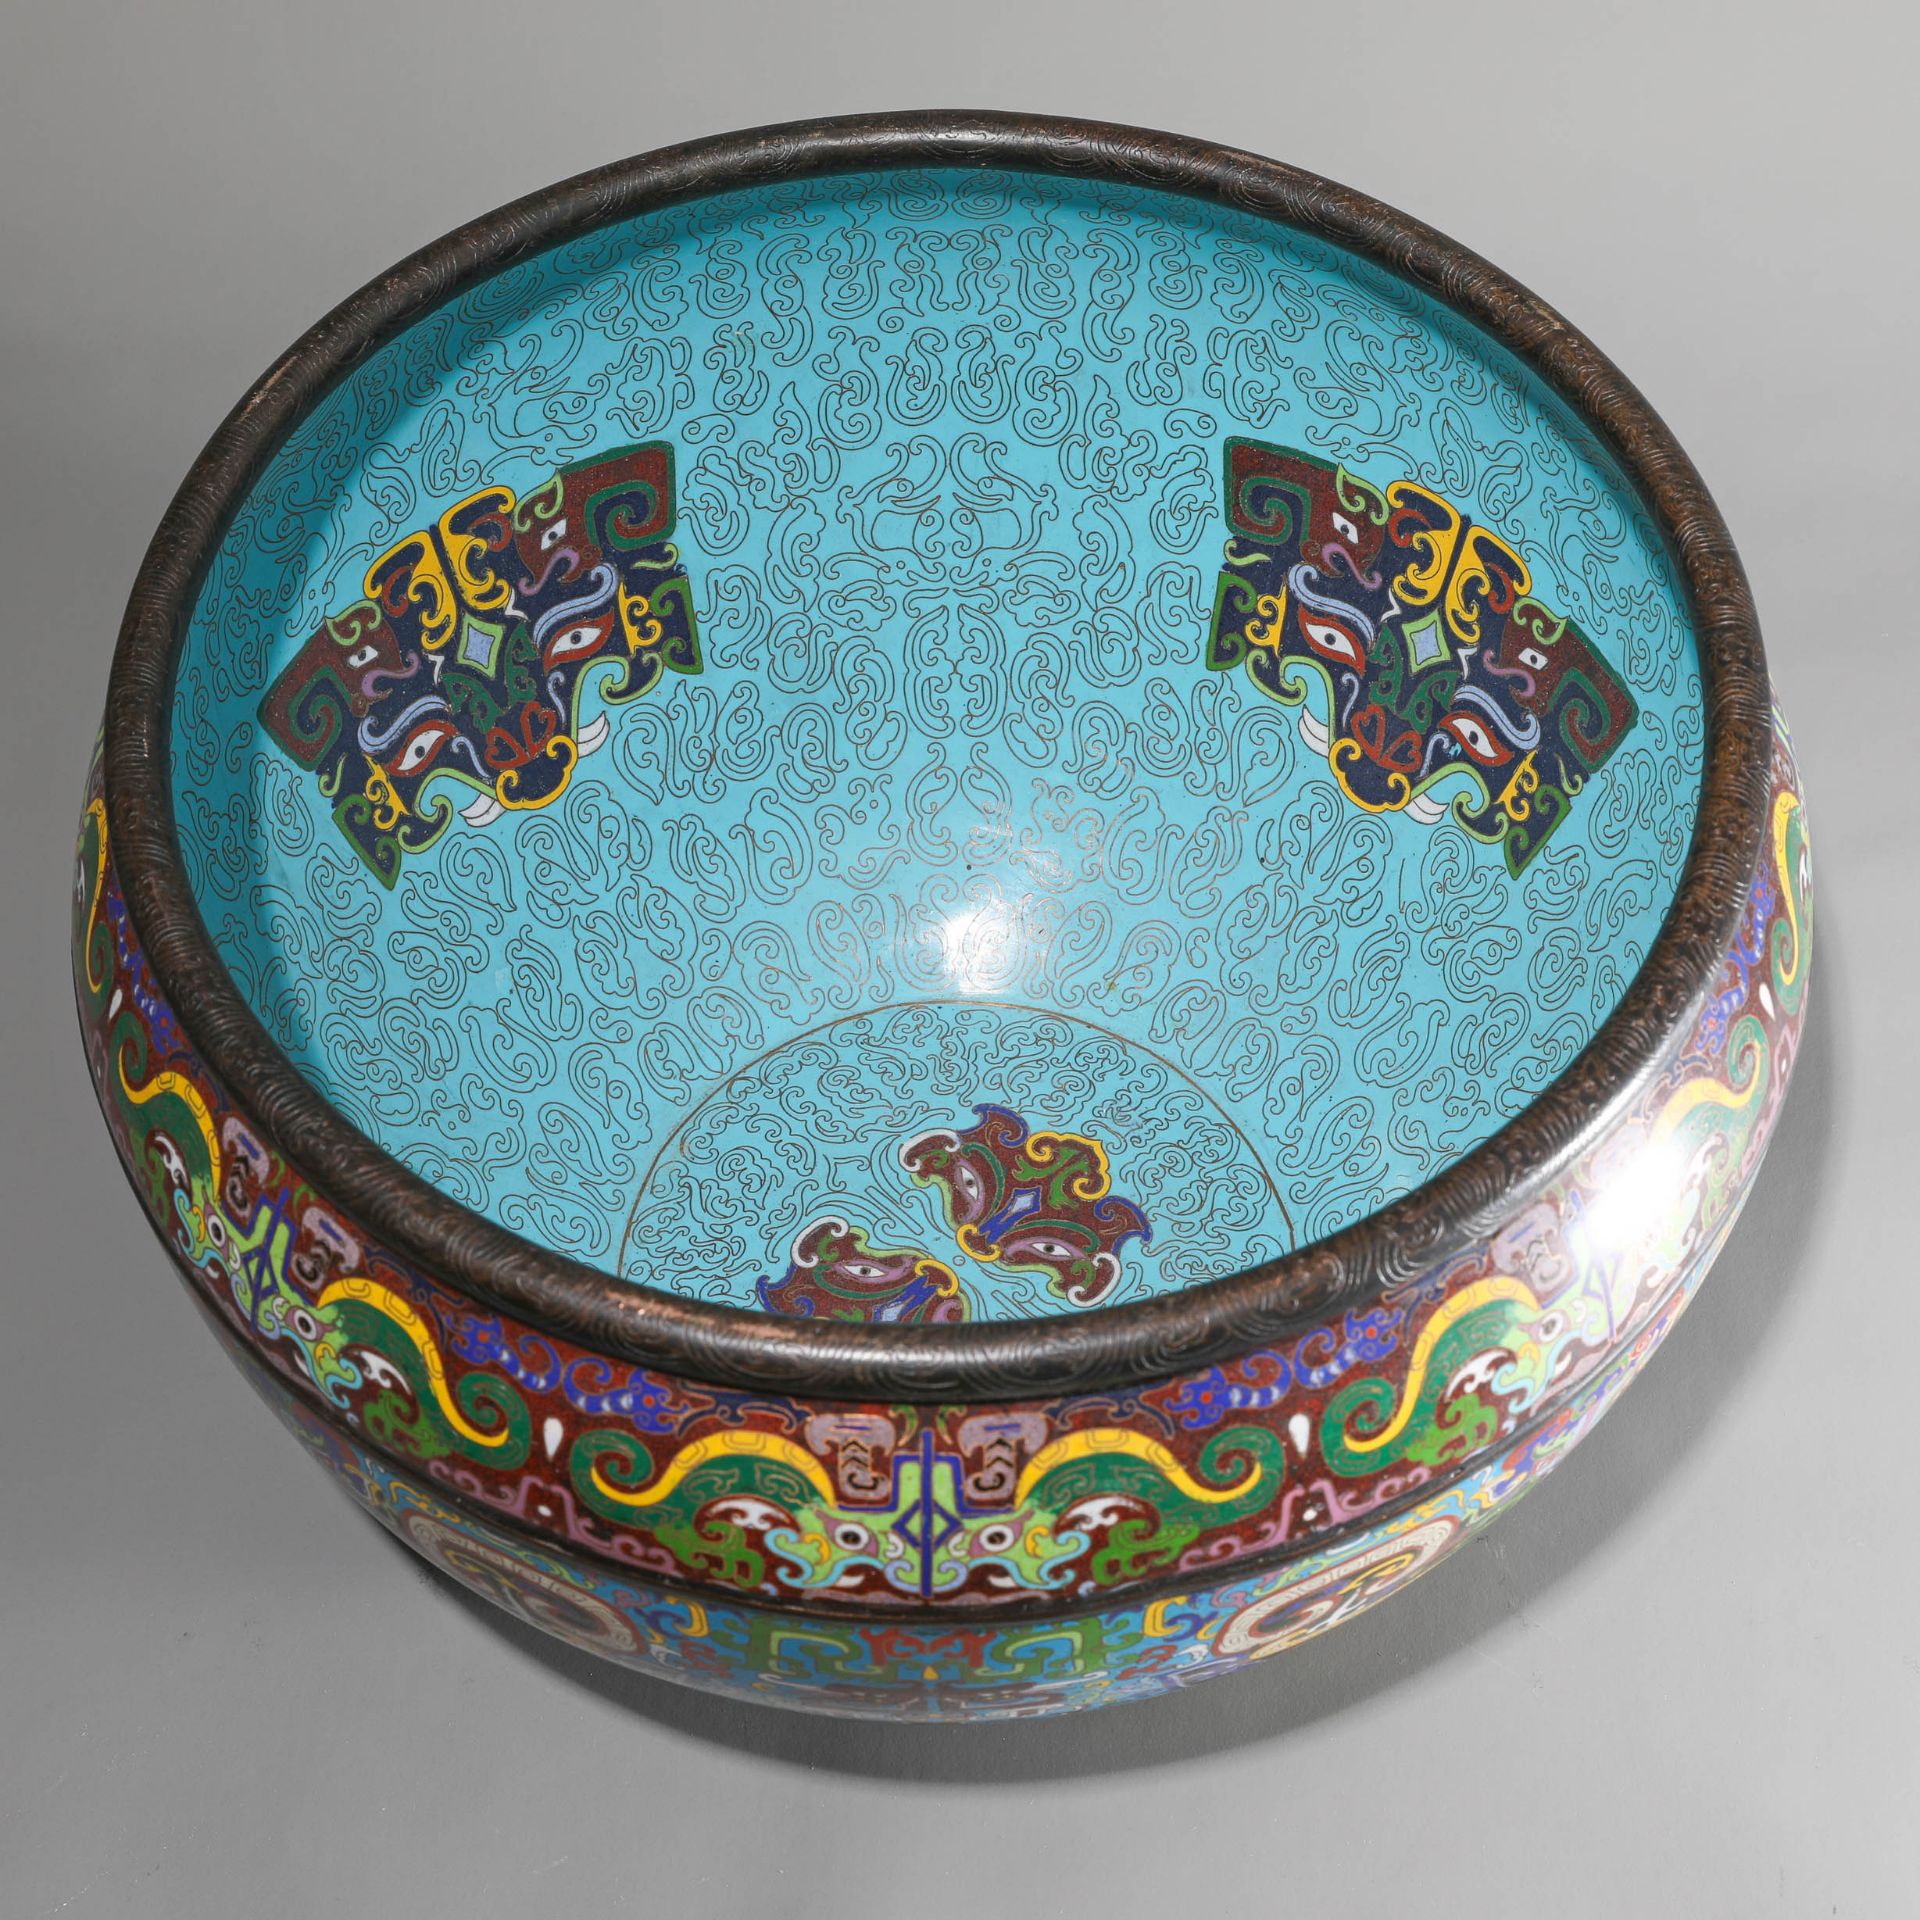 Large Cloisonné bowl with Taotie masks and tendrils - Image 5 of 7